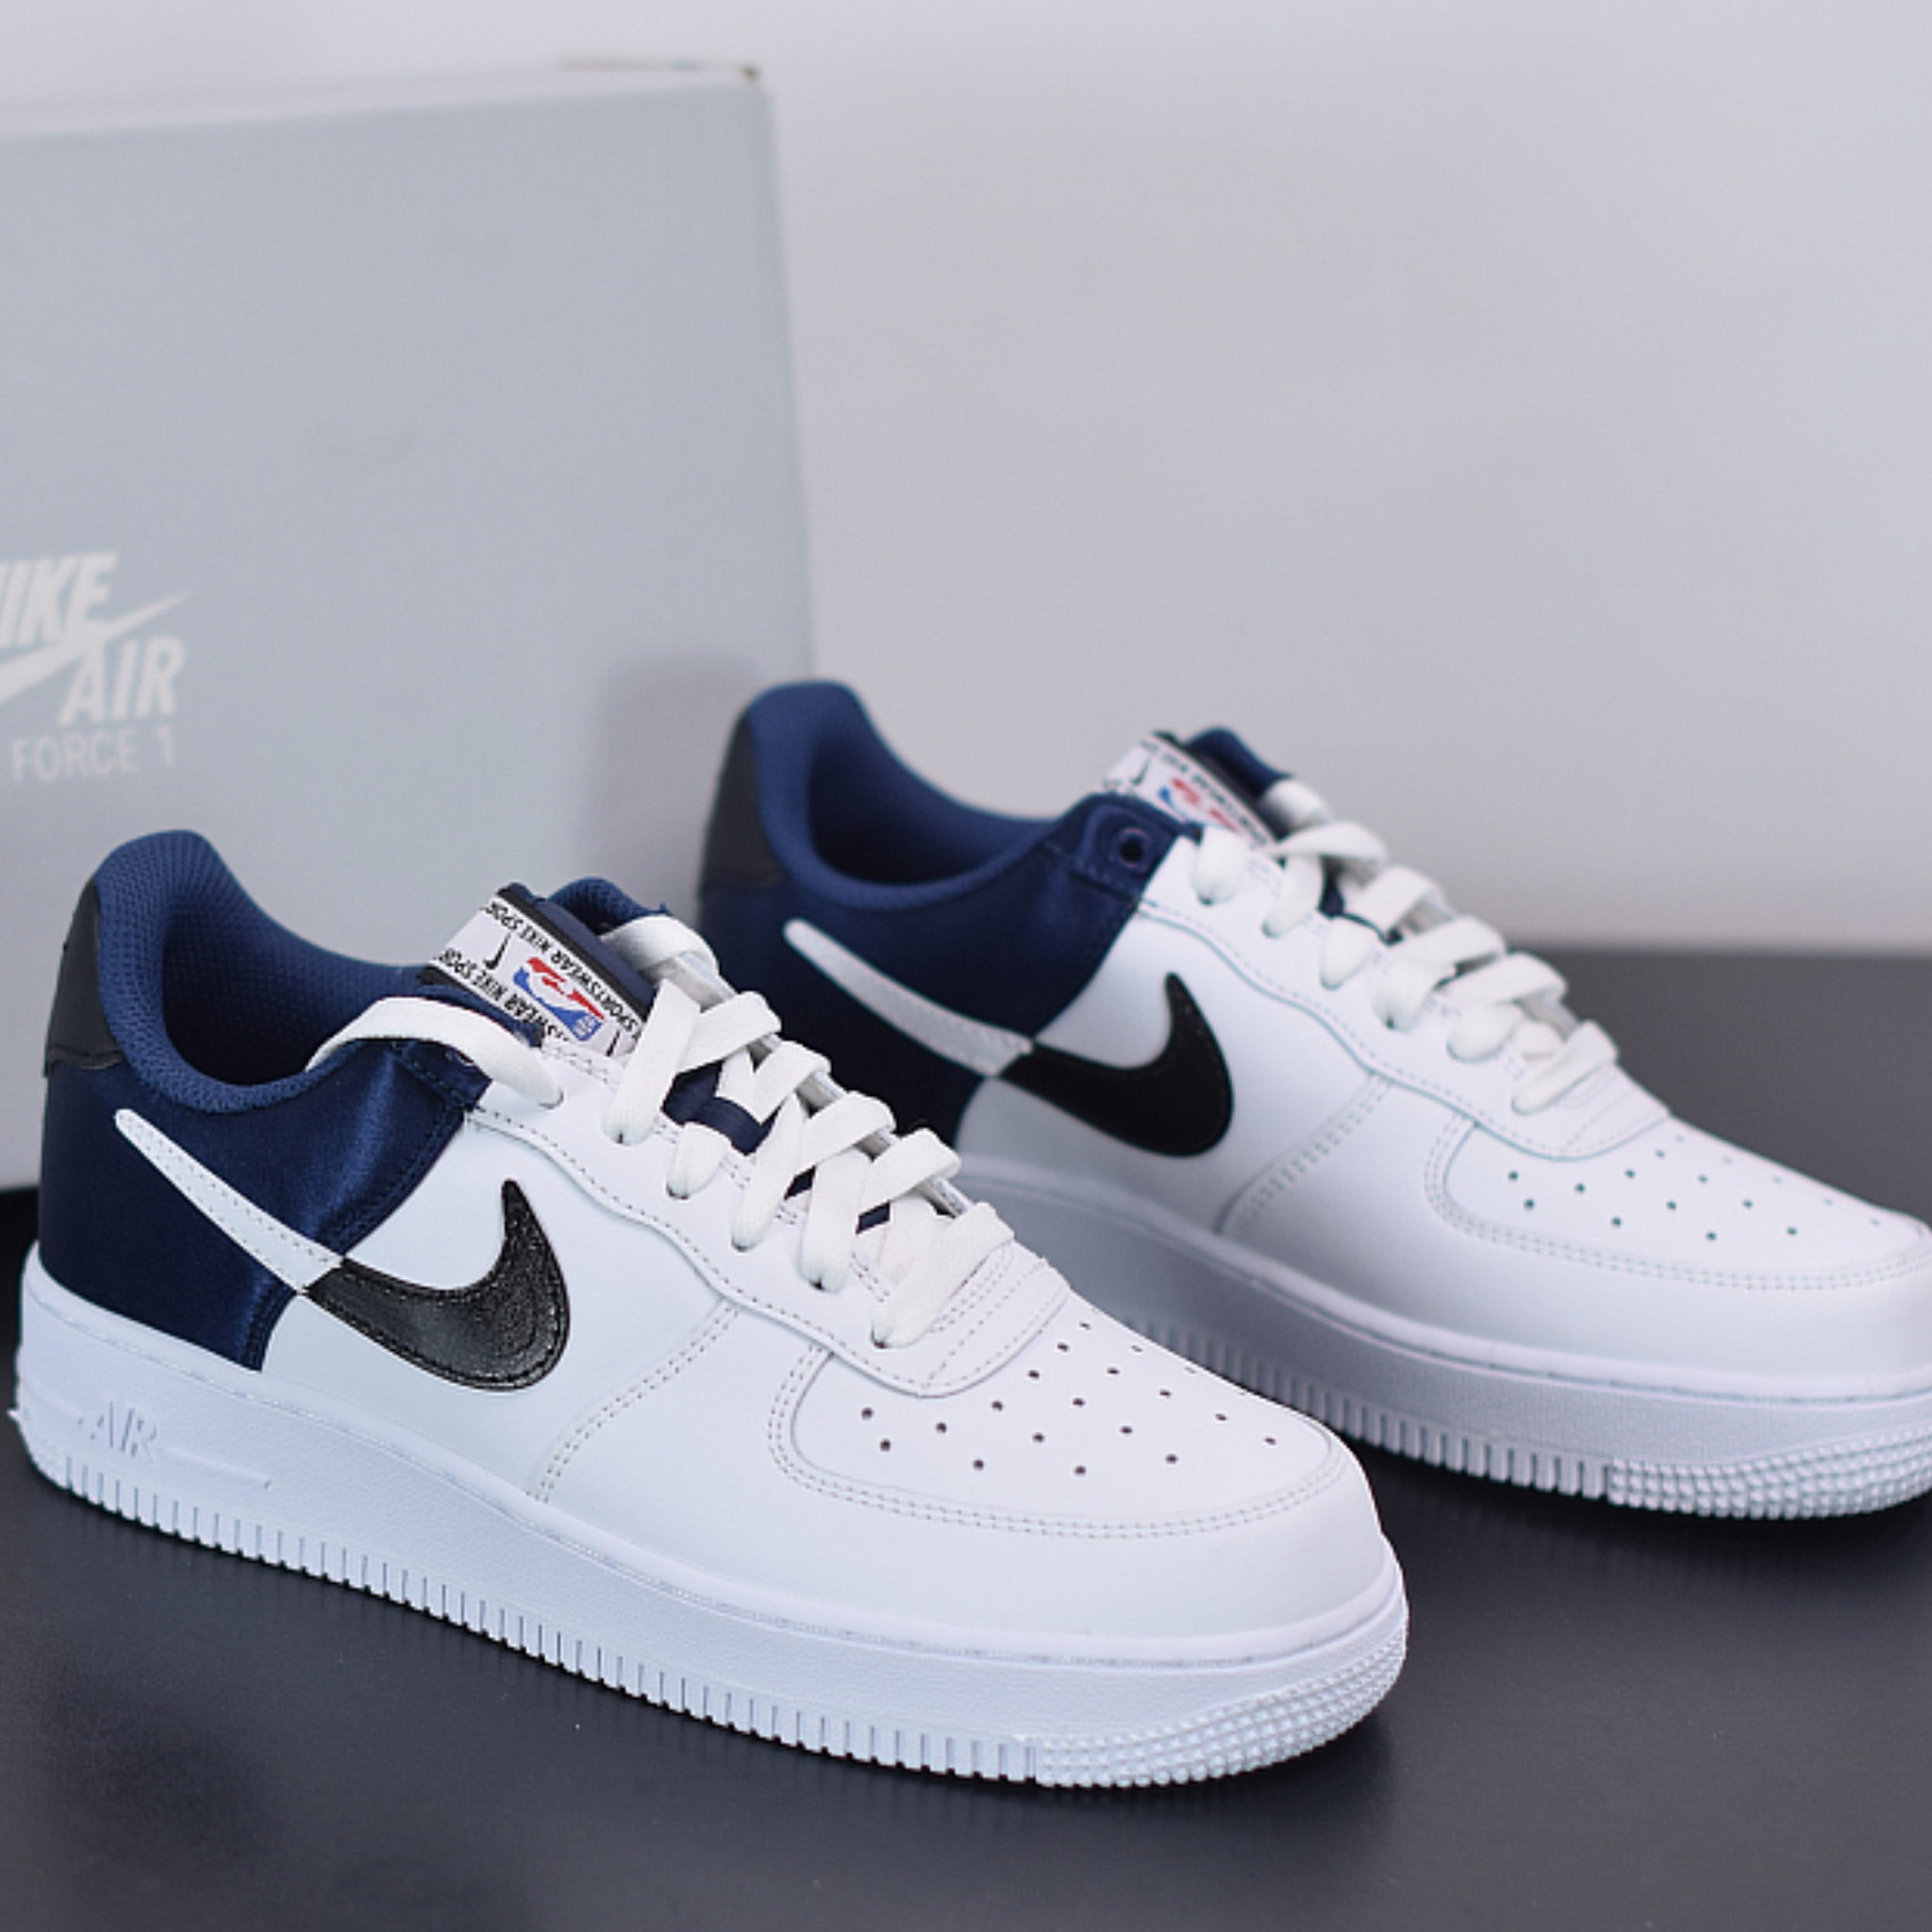 On Sale: NBA x Nike Air Force 1 High Midnight Navy — Sneaker Shouts